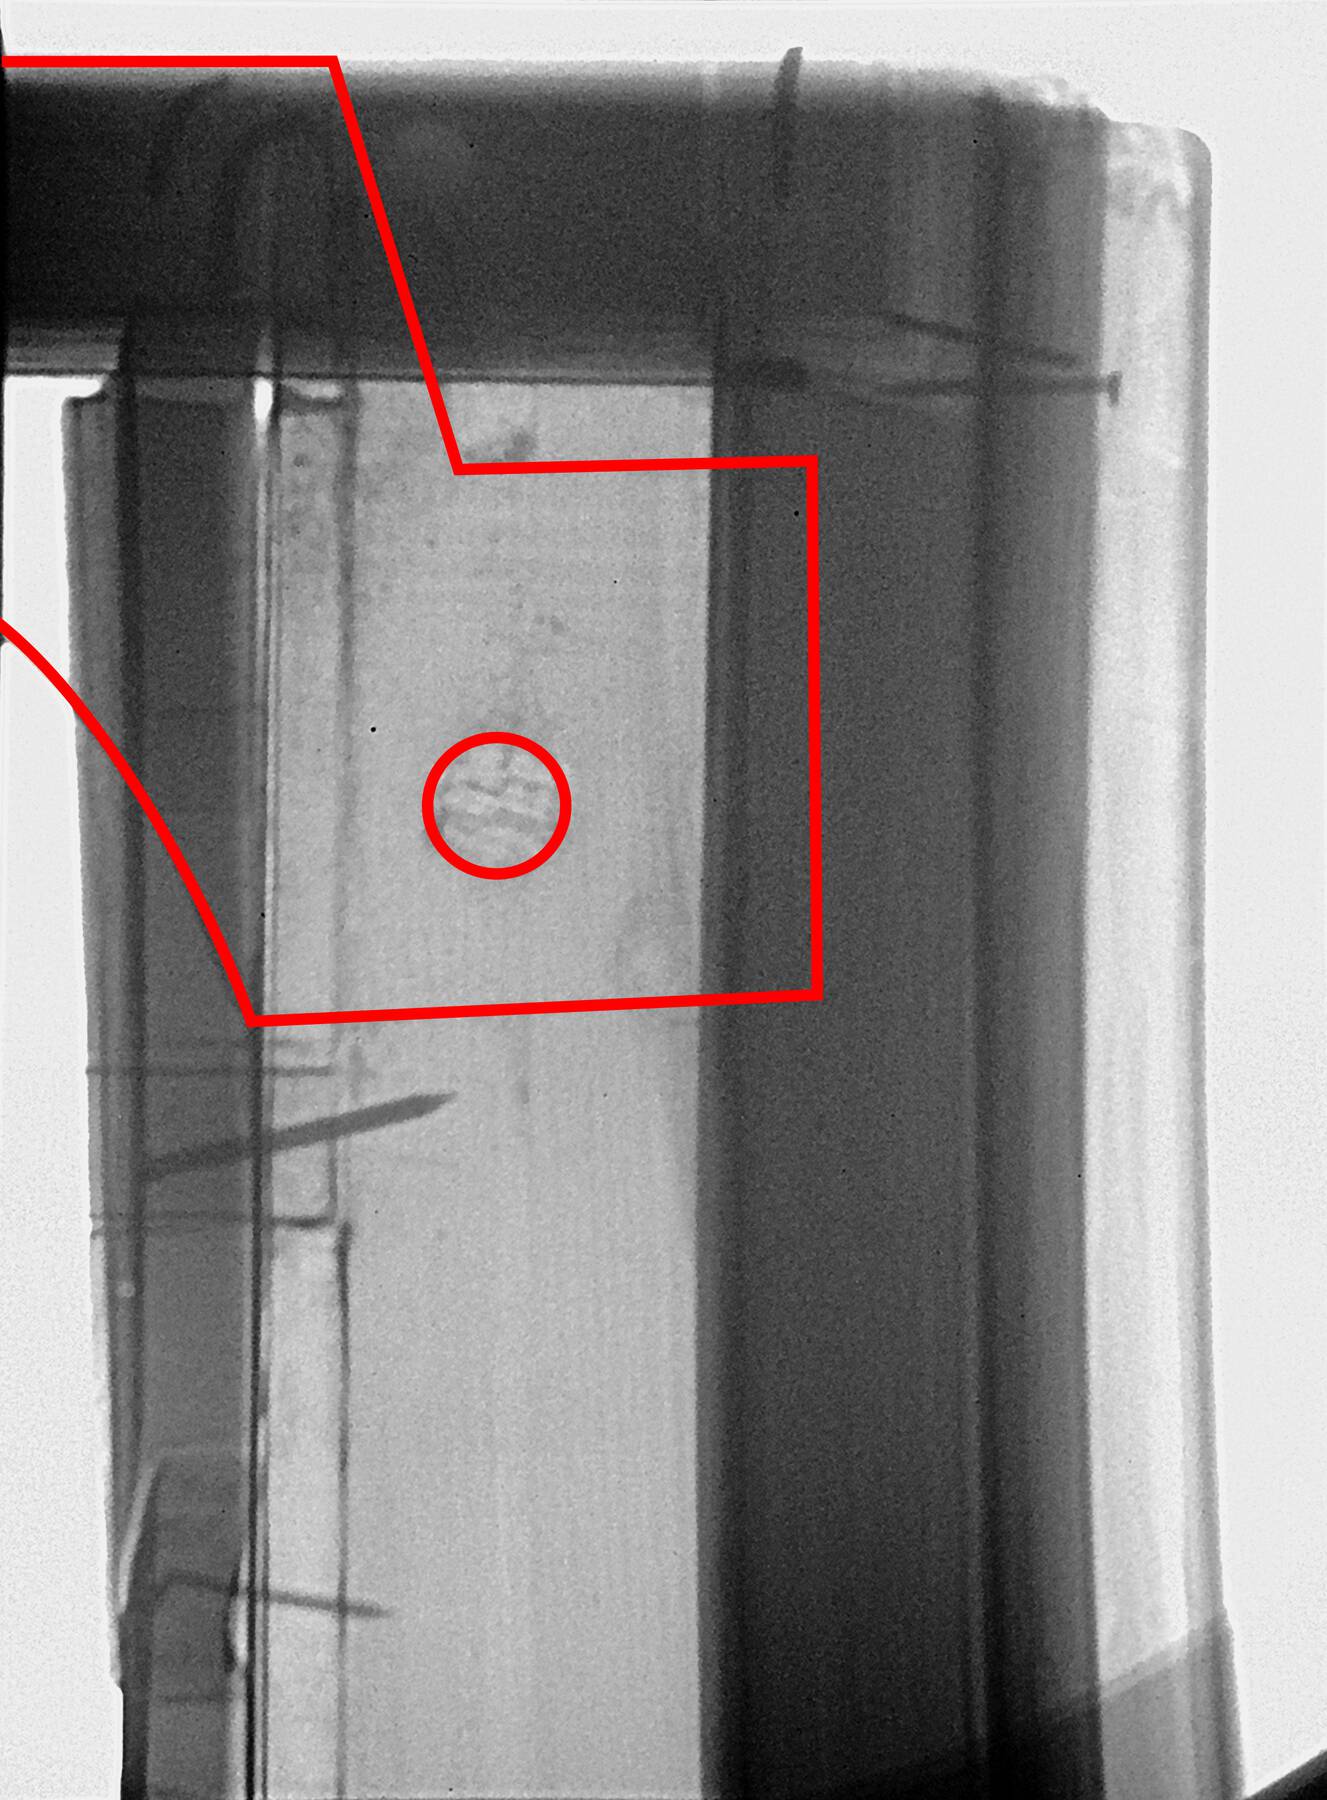 black-and-white x-ray with a red circle and irregular polygon superimposed on top to indicate the location of angled cuts